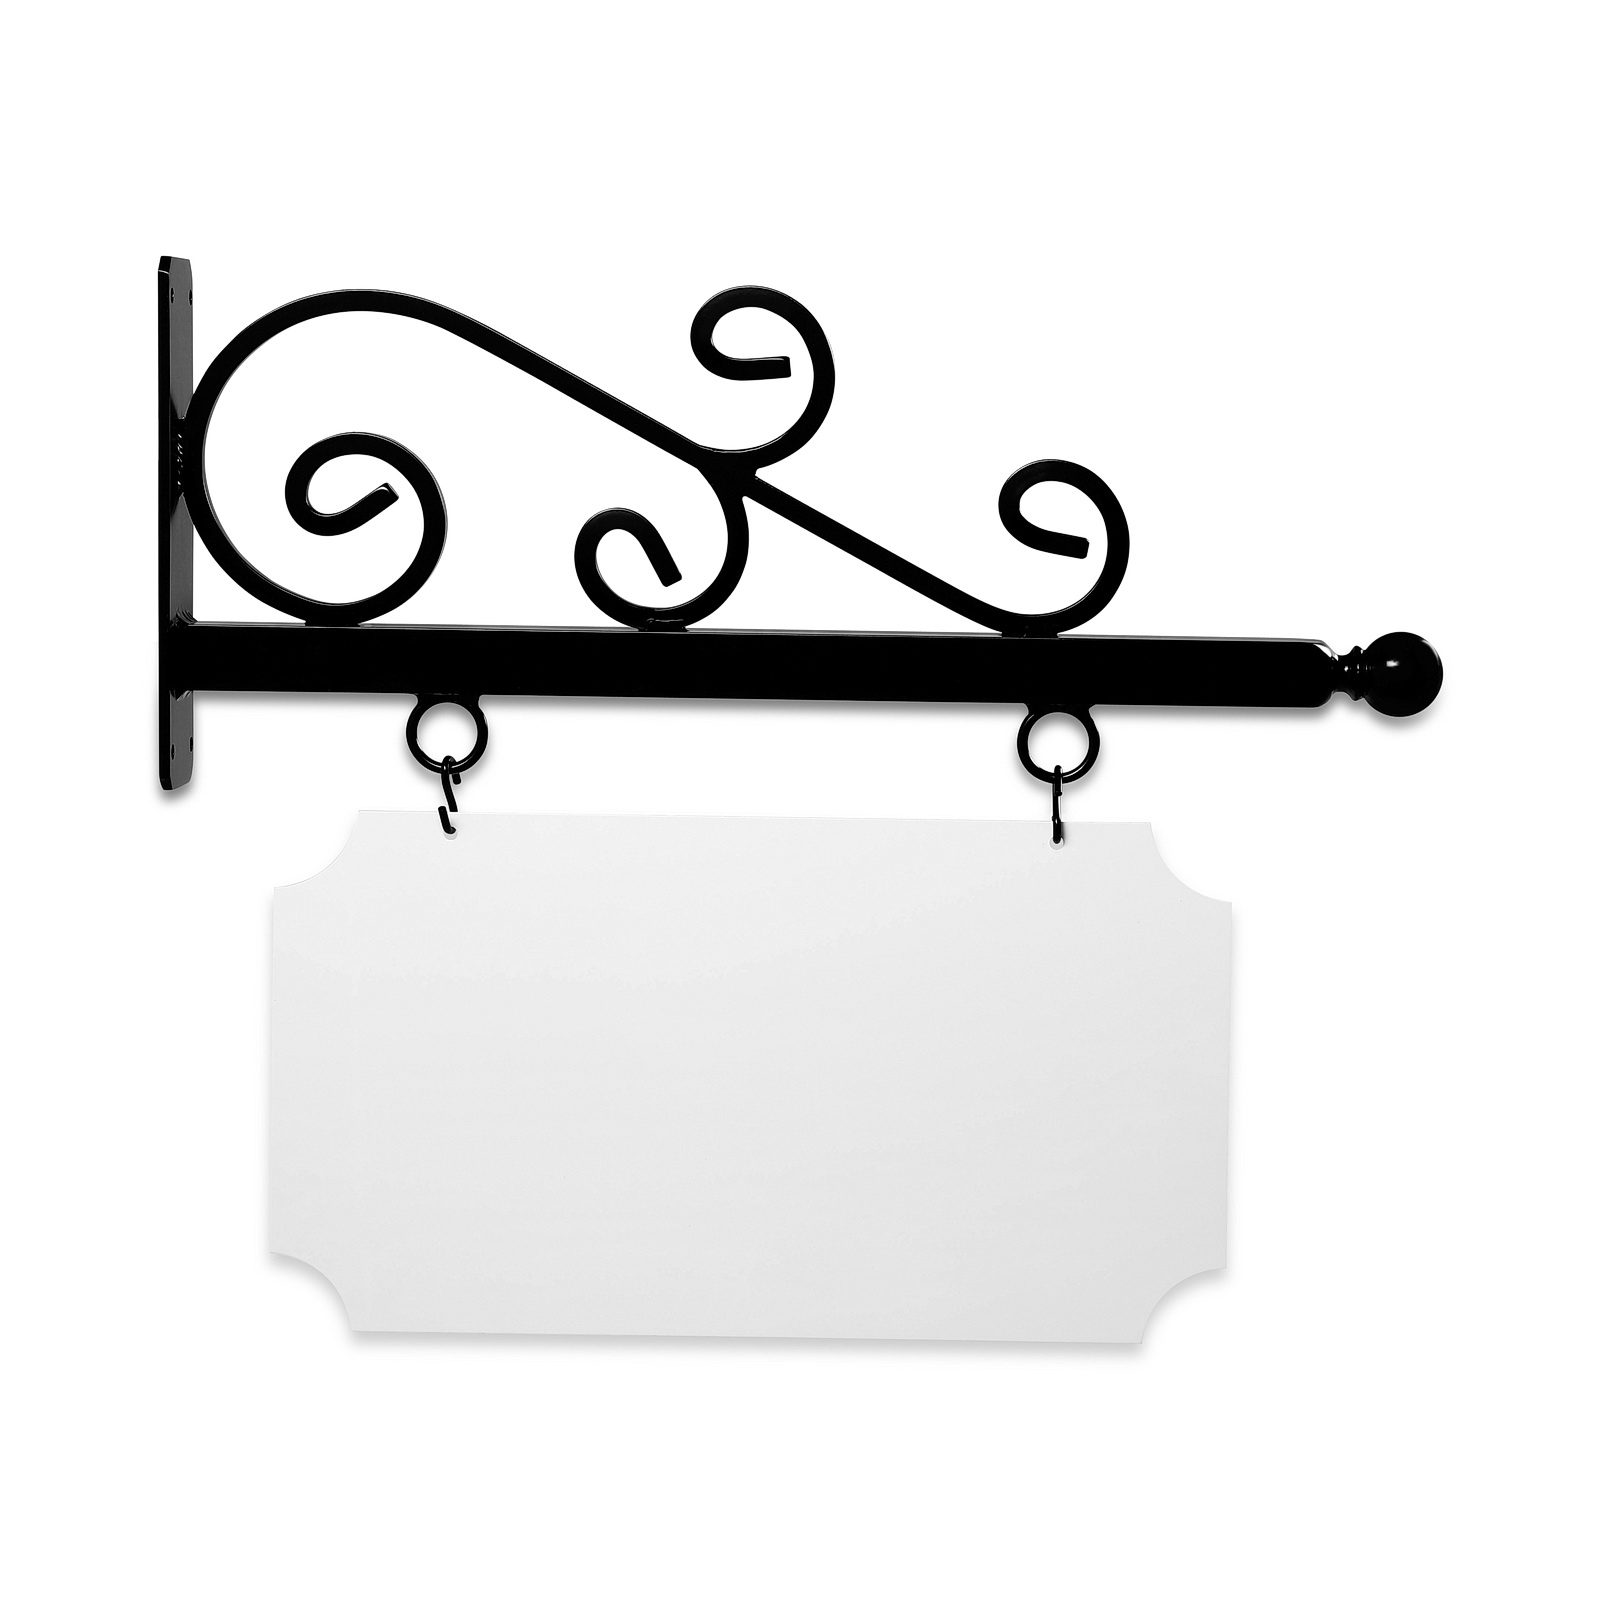 24'' Wide Wispy Style Bracket in  Black Powder Coated Aluminum with 12'' Tall X 22'' Wide X .063'' Thick White Aluminum Sign Blank and 2 Black Powder Coated S-Hooks